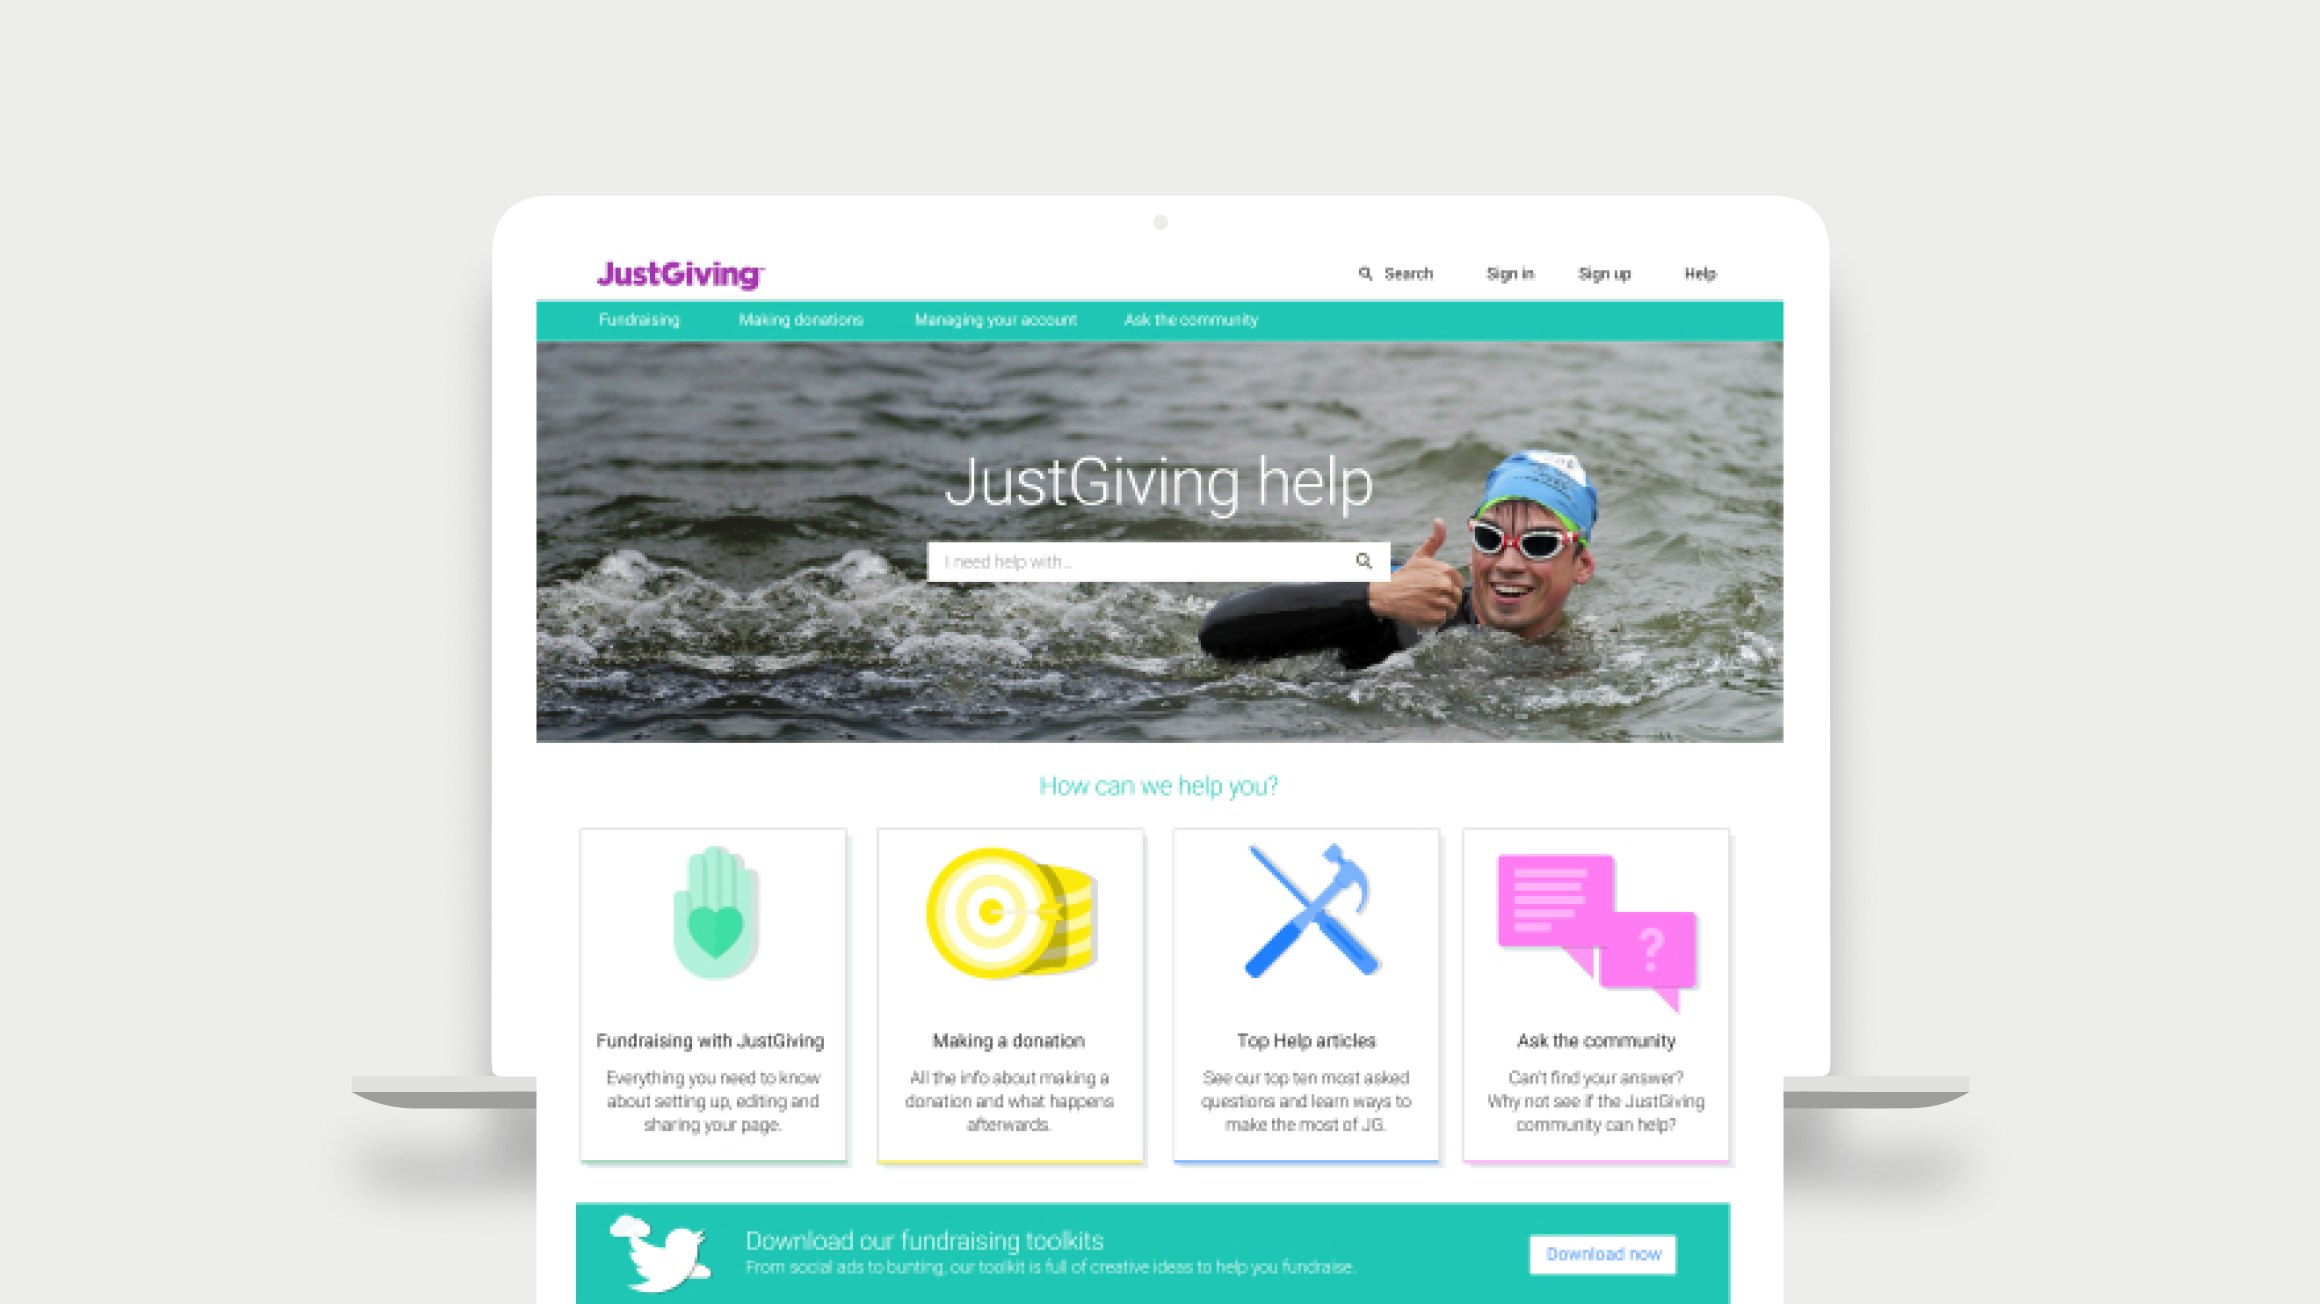 Redesign of Just Giving’s ‘Help and support’ pages